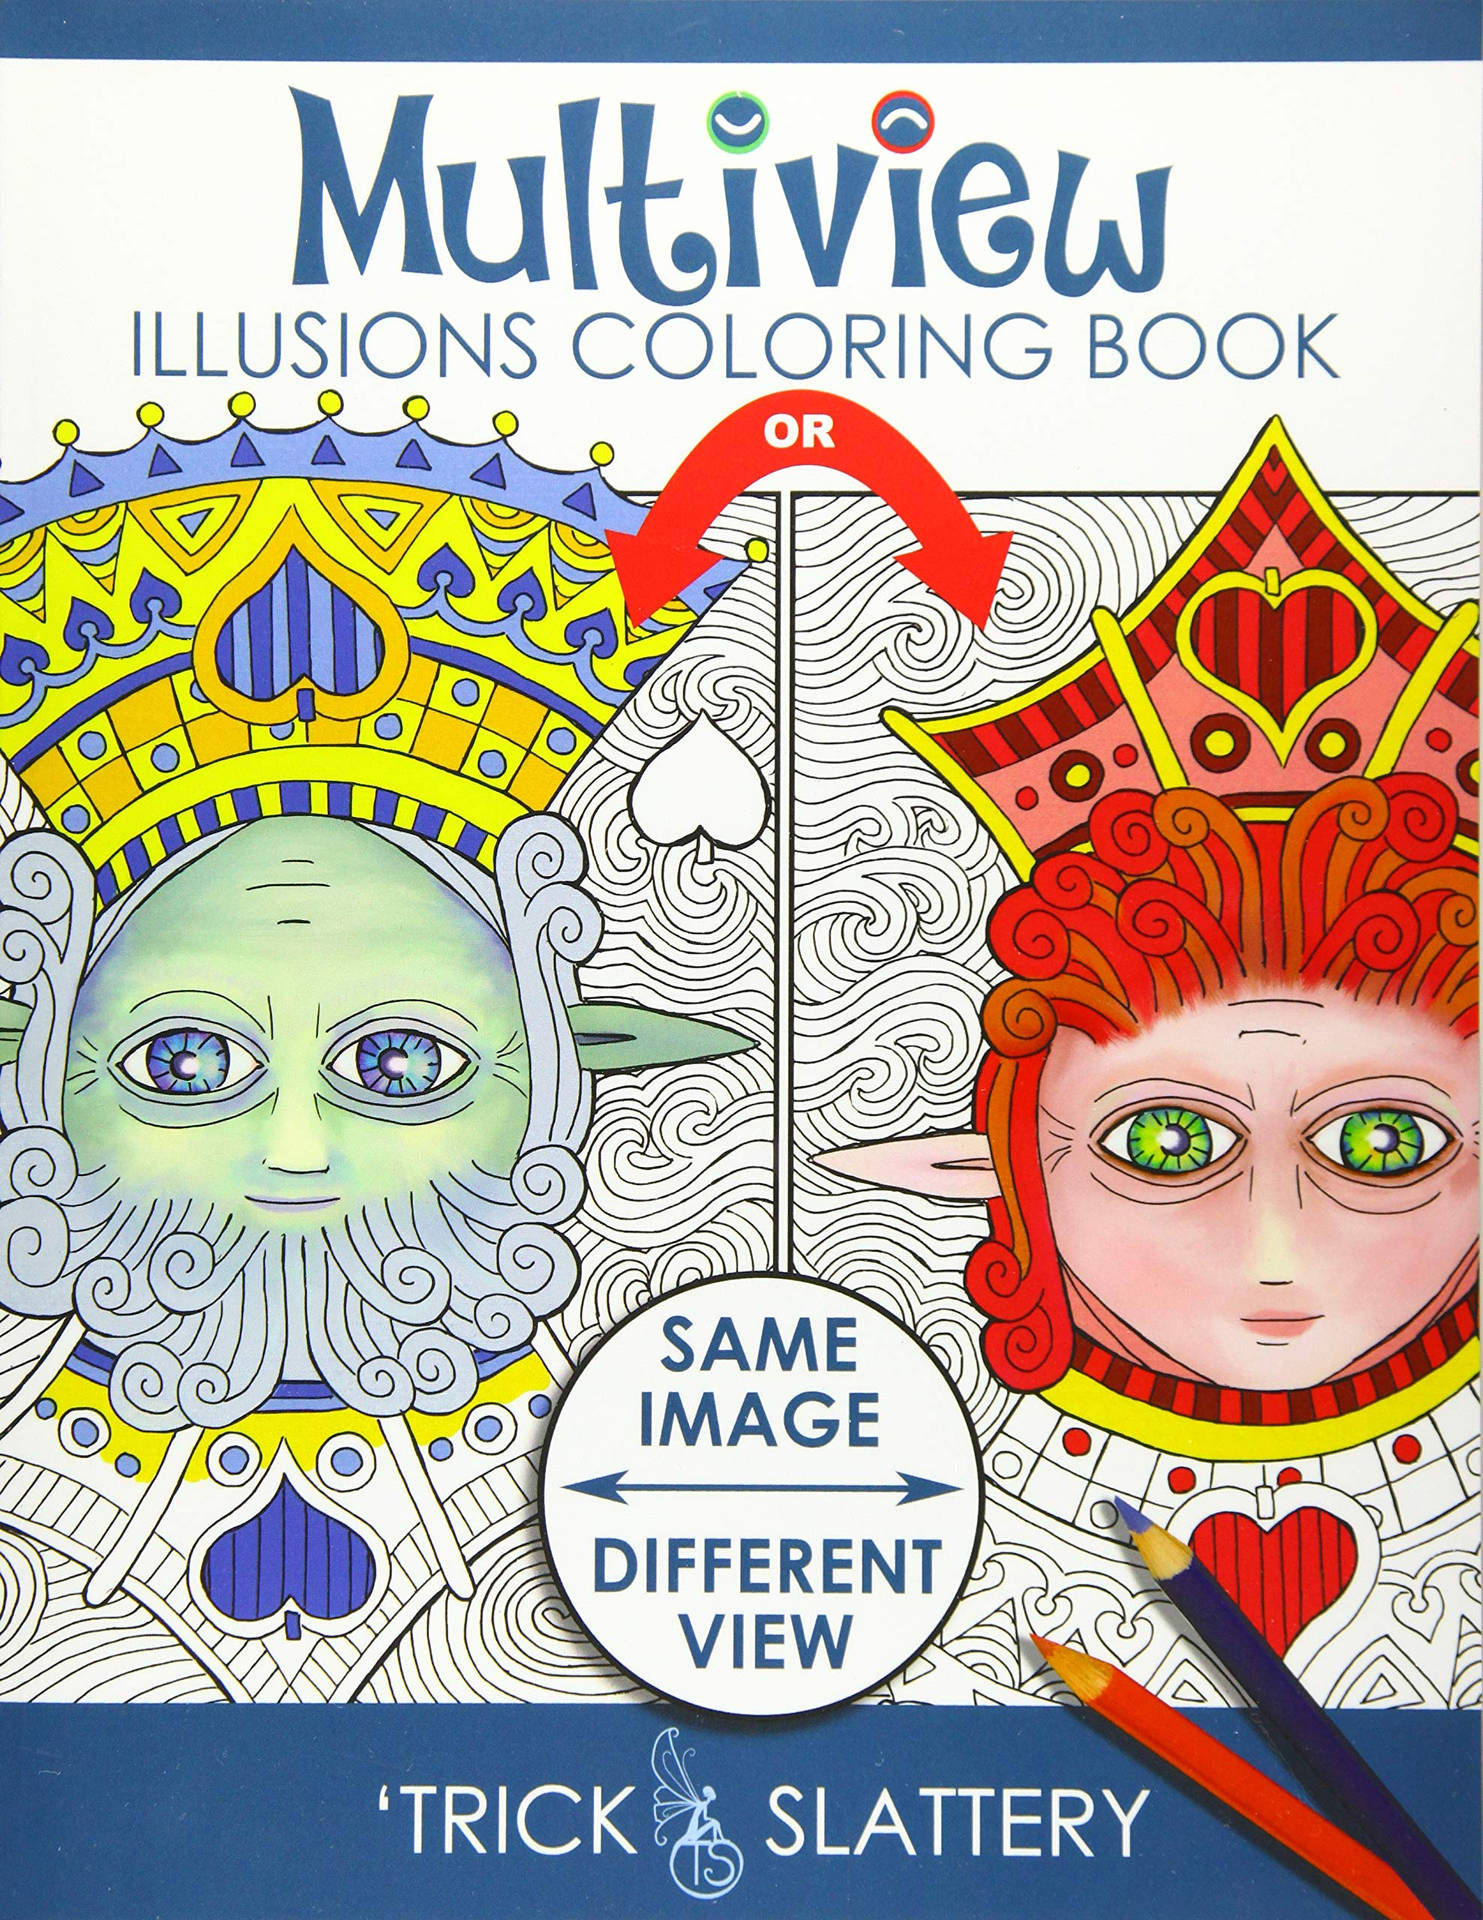 The Cover of the Ambiguous Illusions Coloring Book Wallpaper